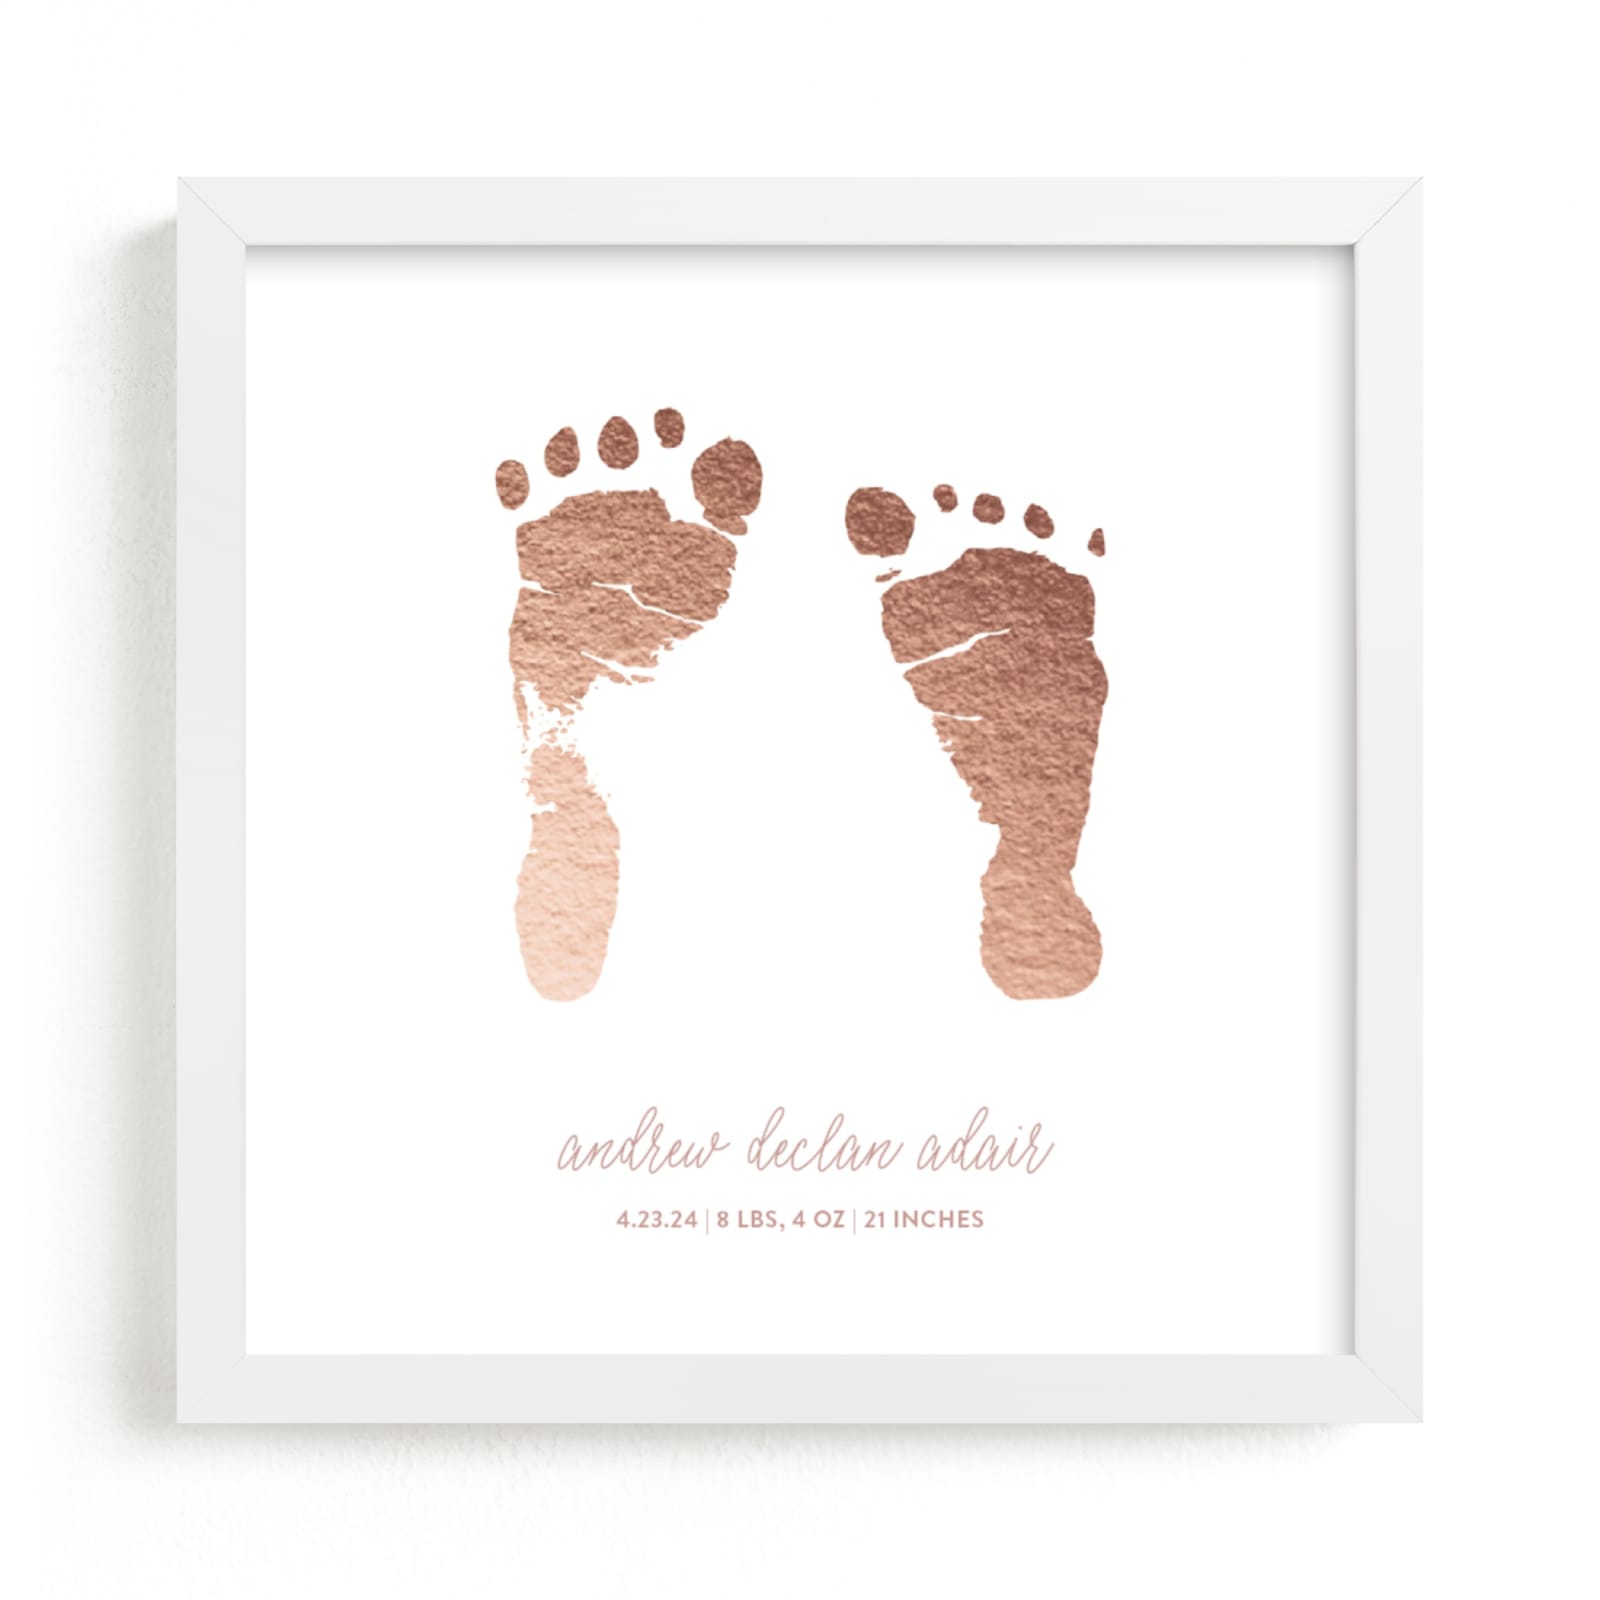 This is a rosegold photos to art by Minted Custom called Custom Footprints Foil Art.